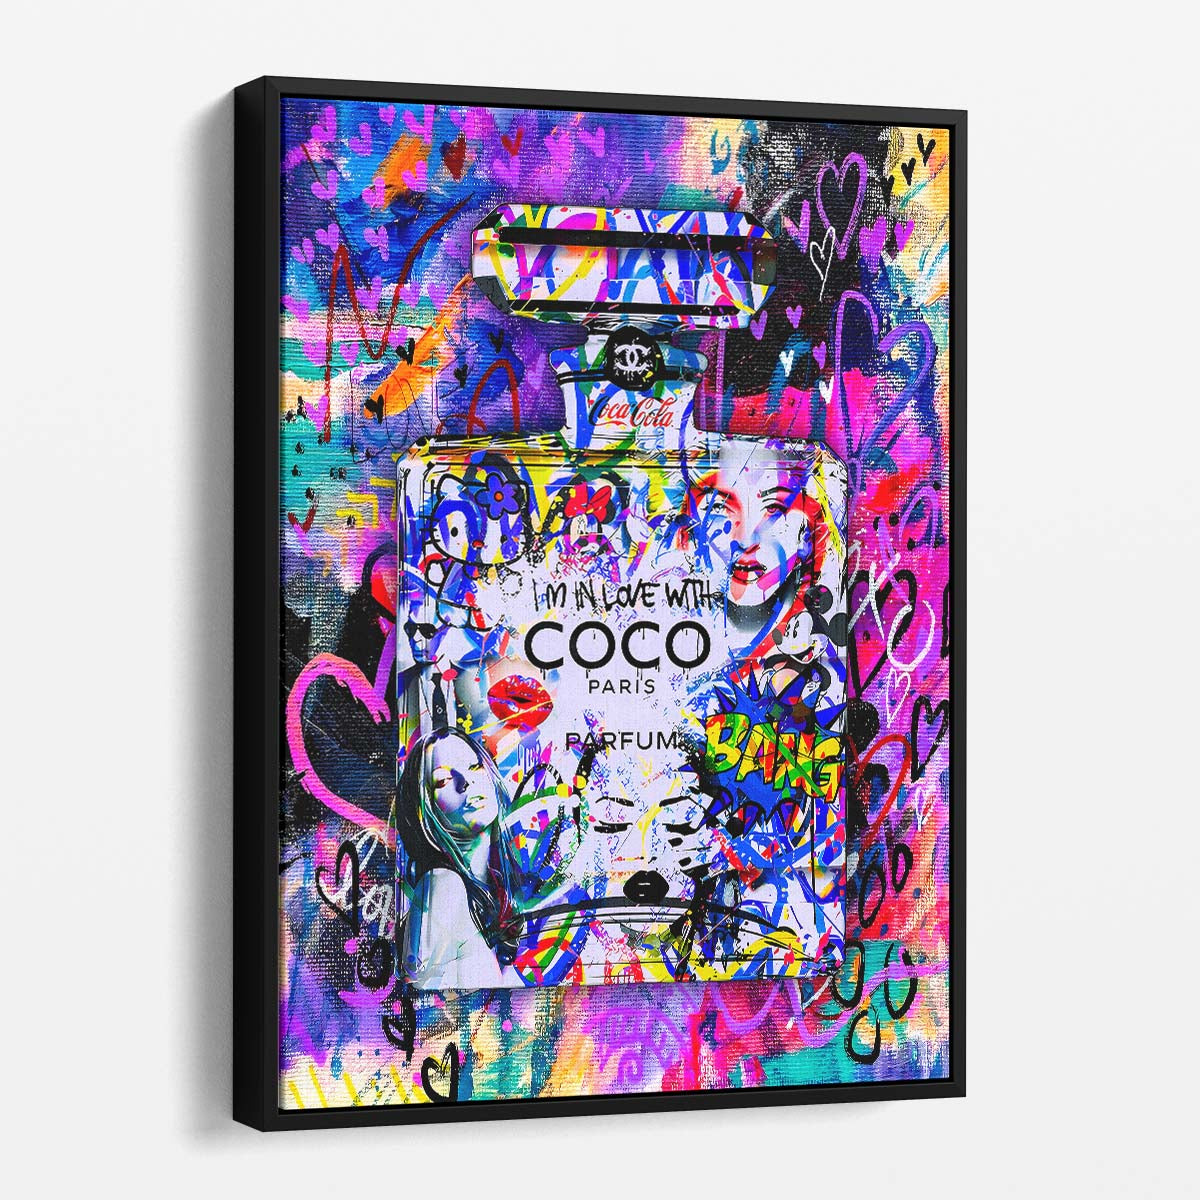 I Am In Love With Coco Chanel Perfume Graffiti Wall Art by Luxuriance Designs. Made in USA.